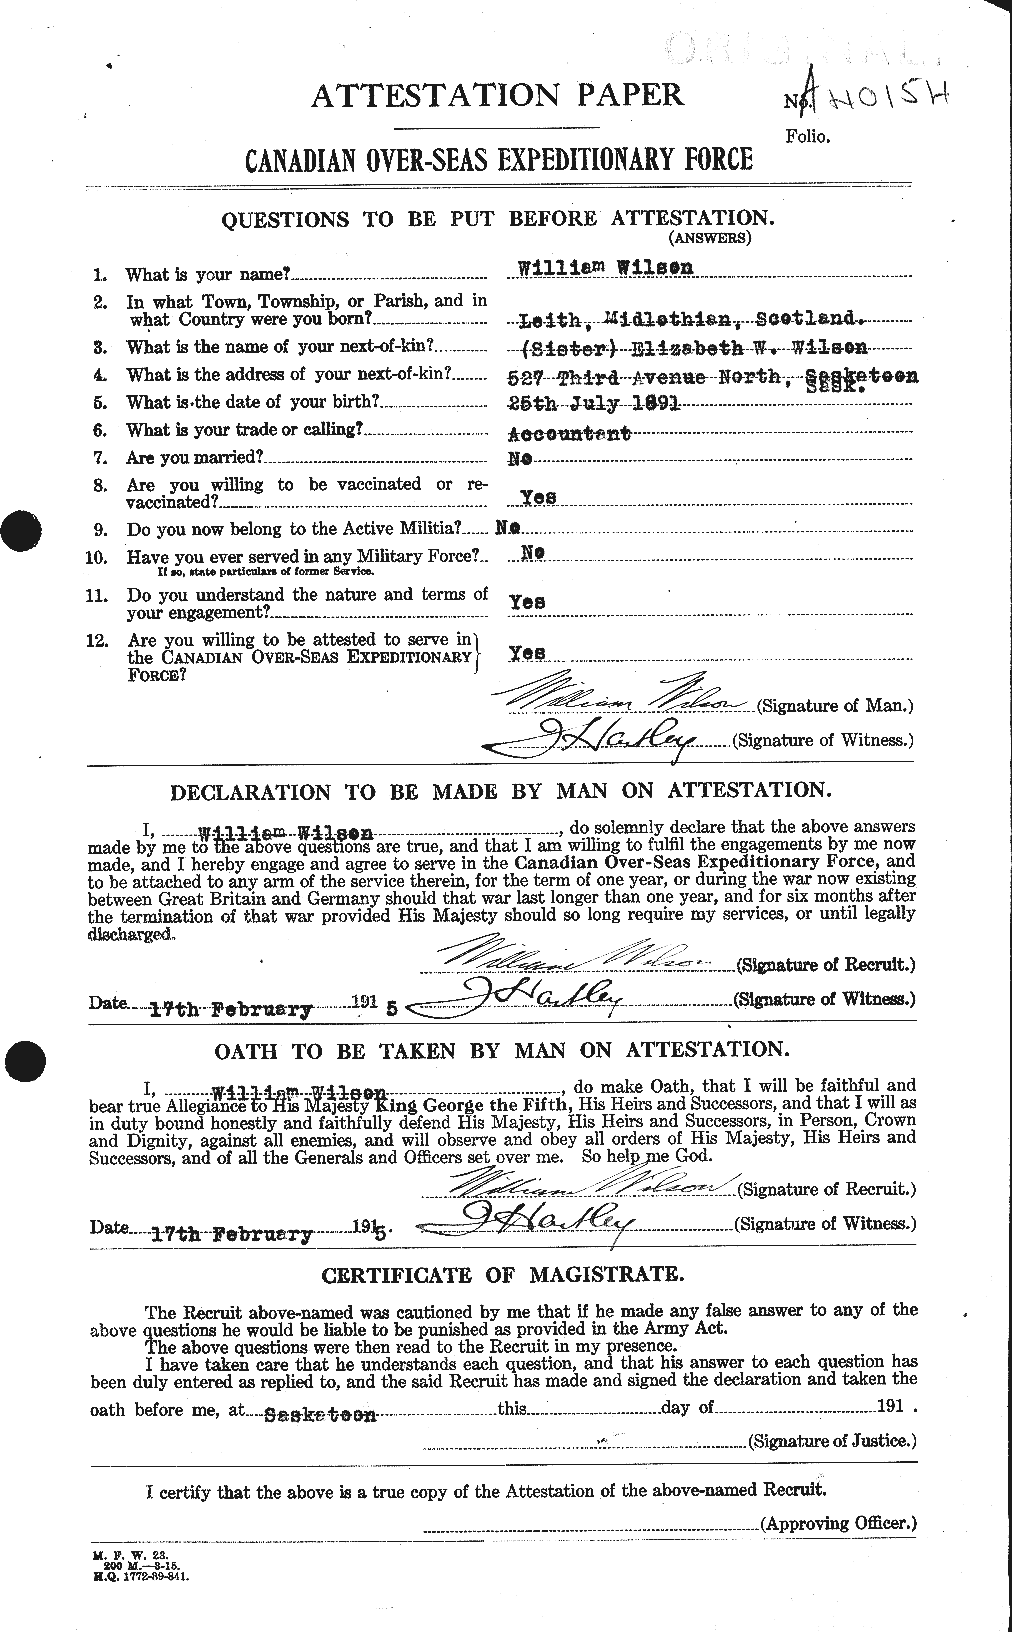 Personnel Records of the First World War - CEF 681844a